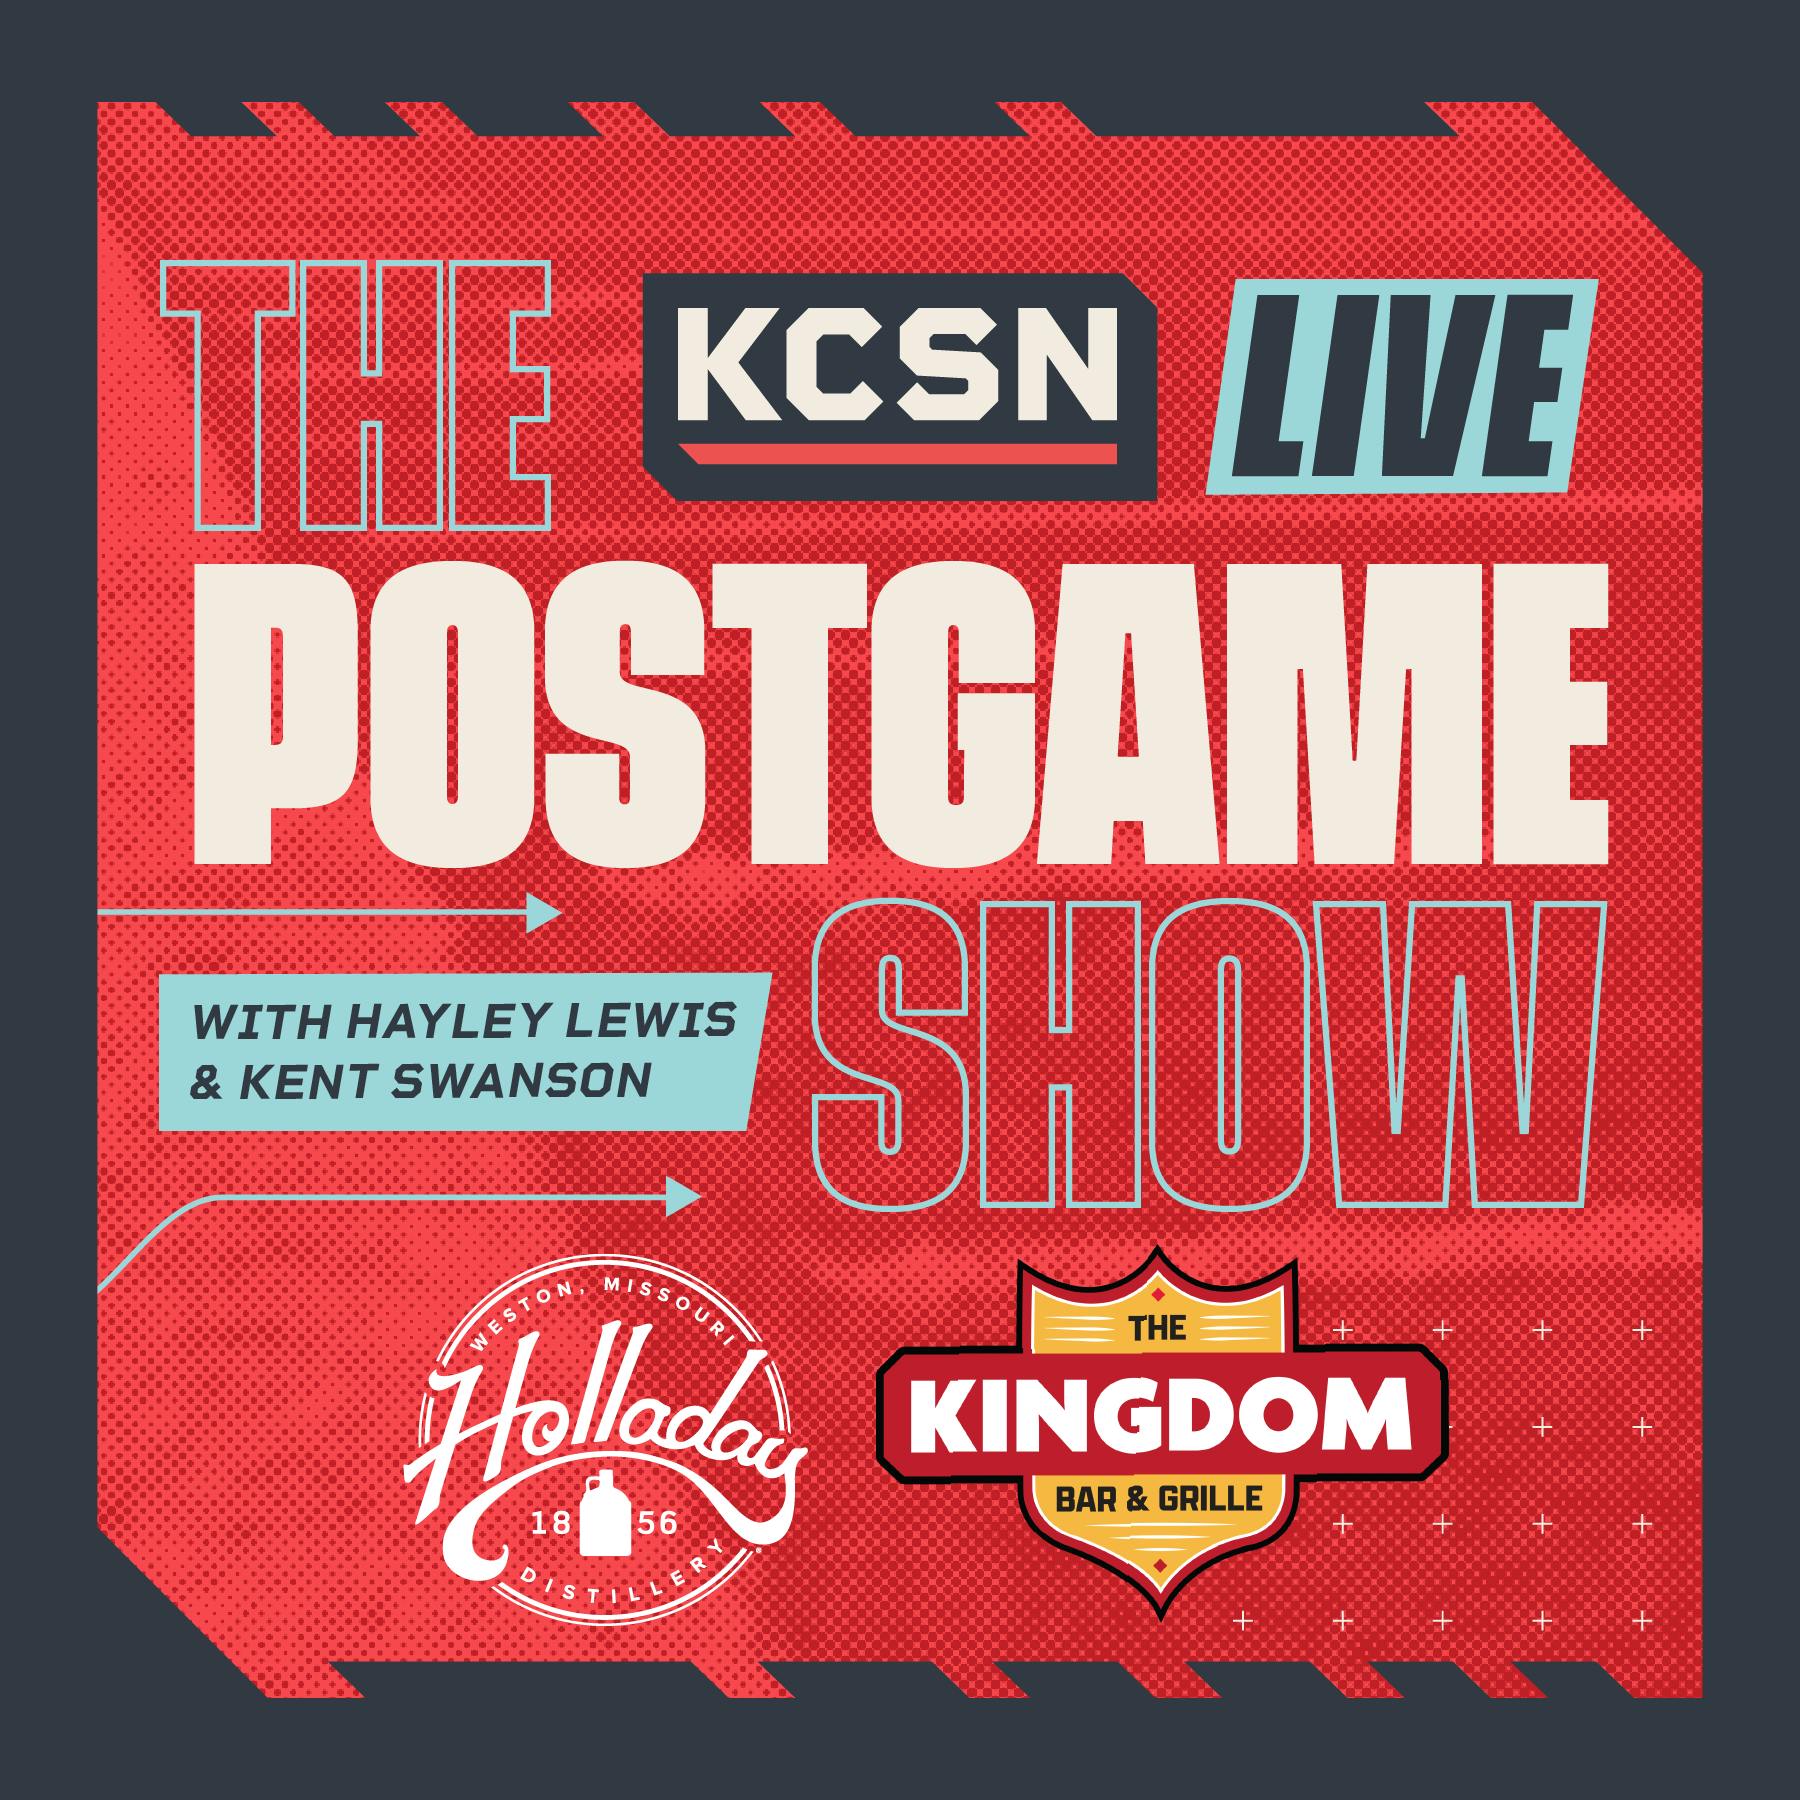 KCSN Live Postgame Show 10/1: Chiefs Claim 23-20 Win to Avoid Upset vs. Jets